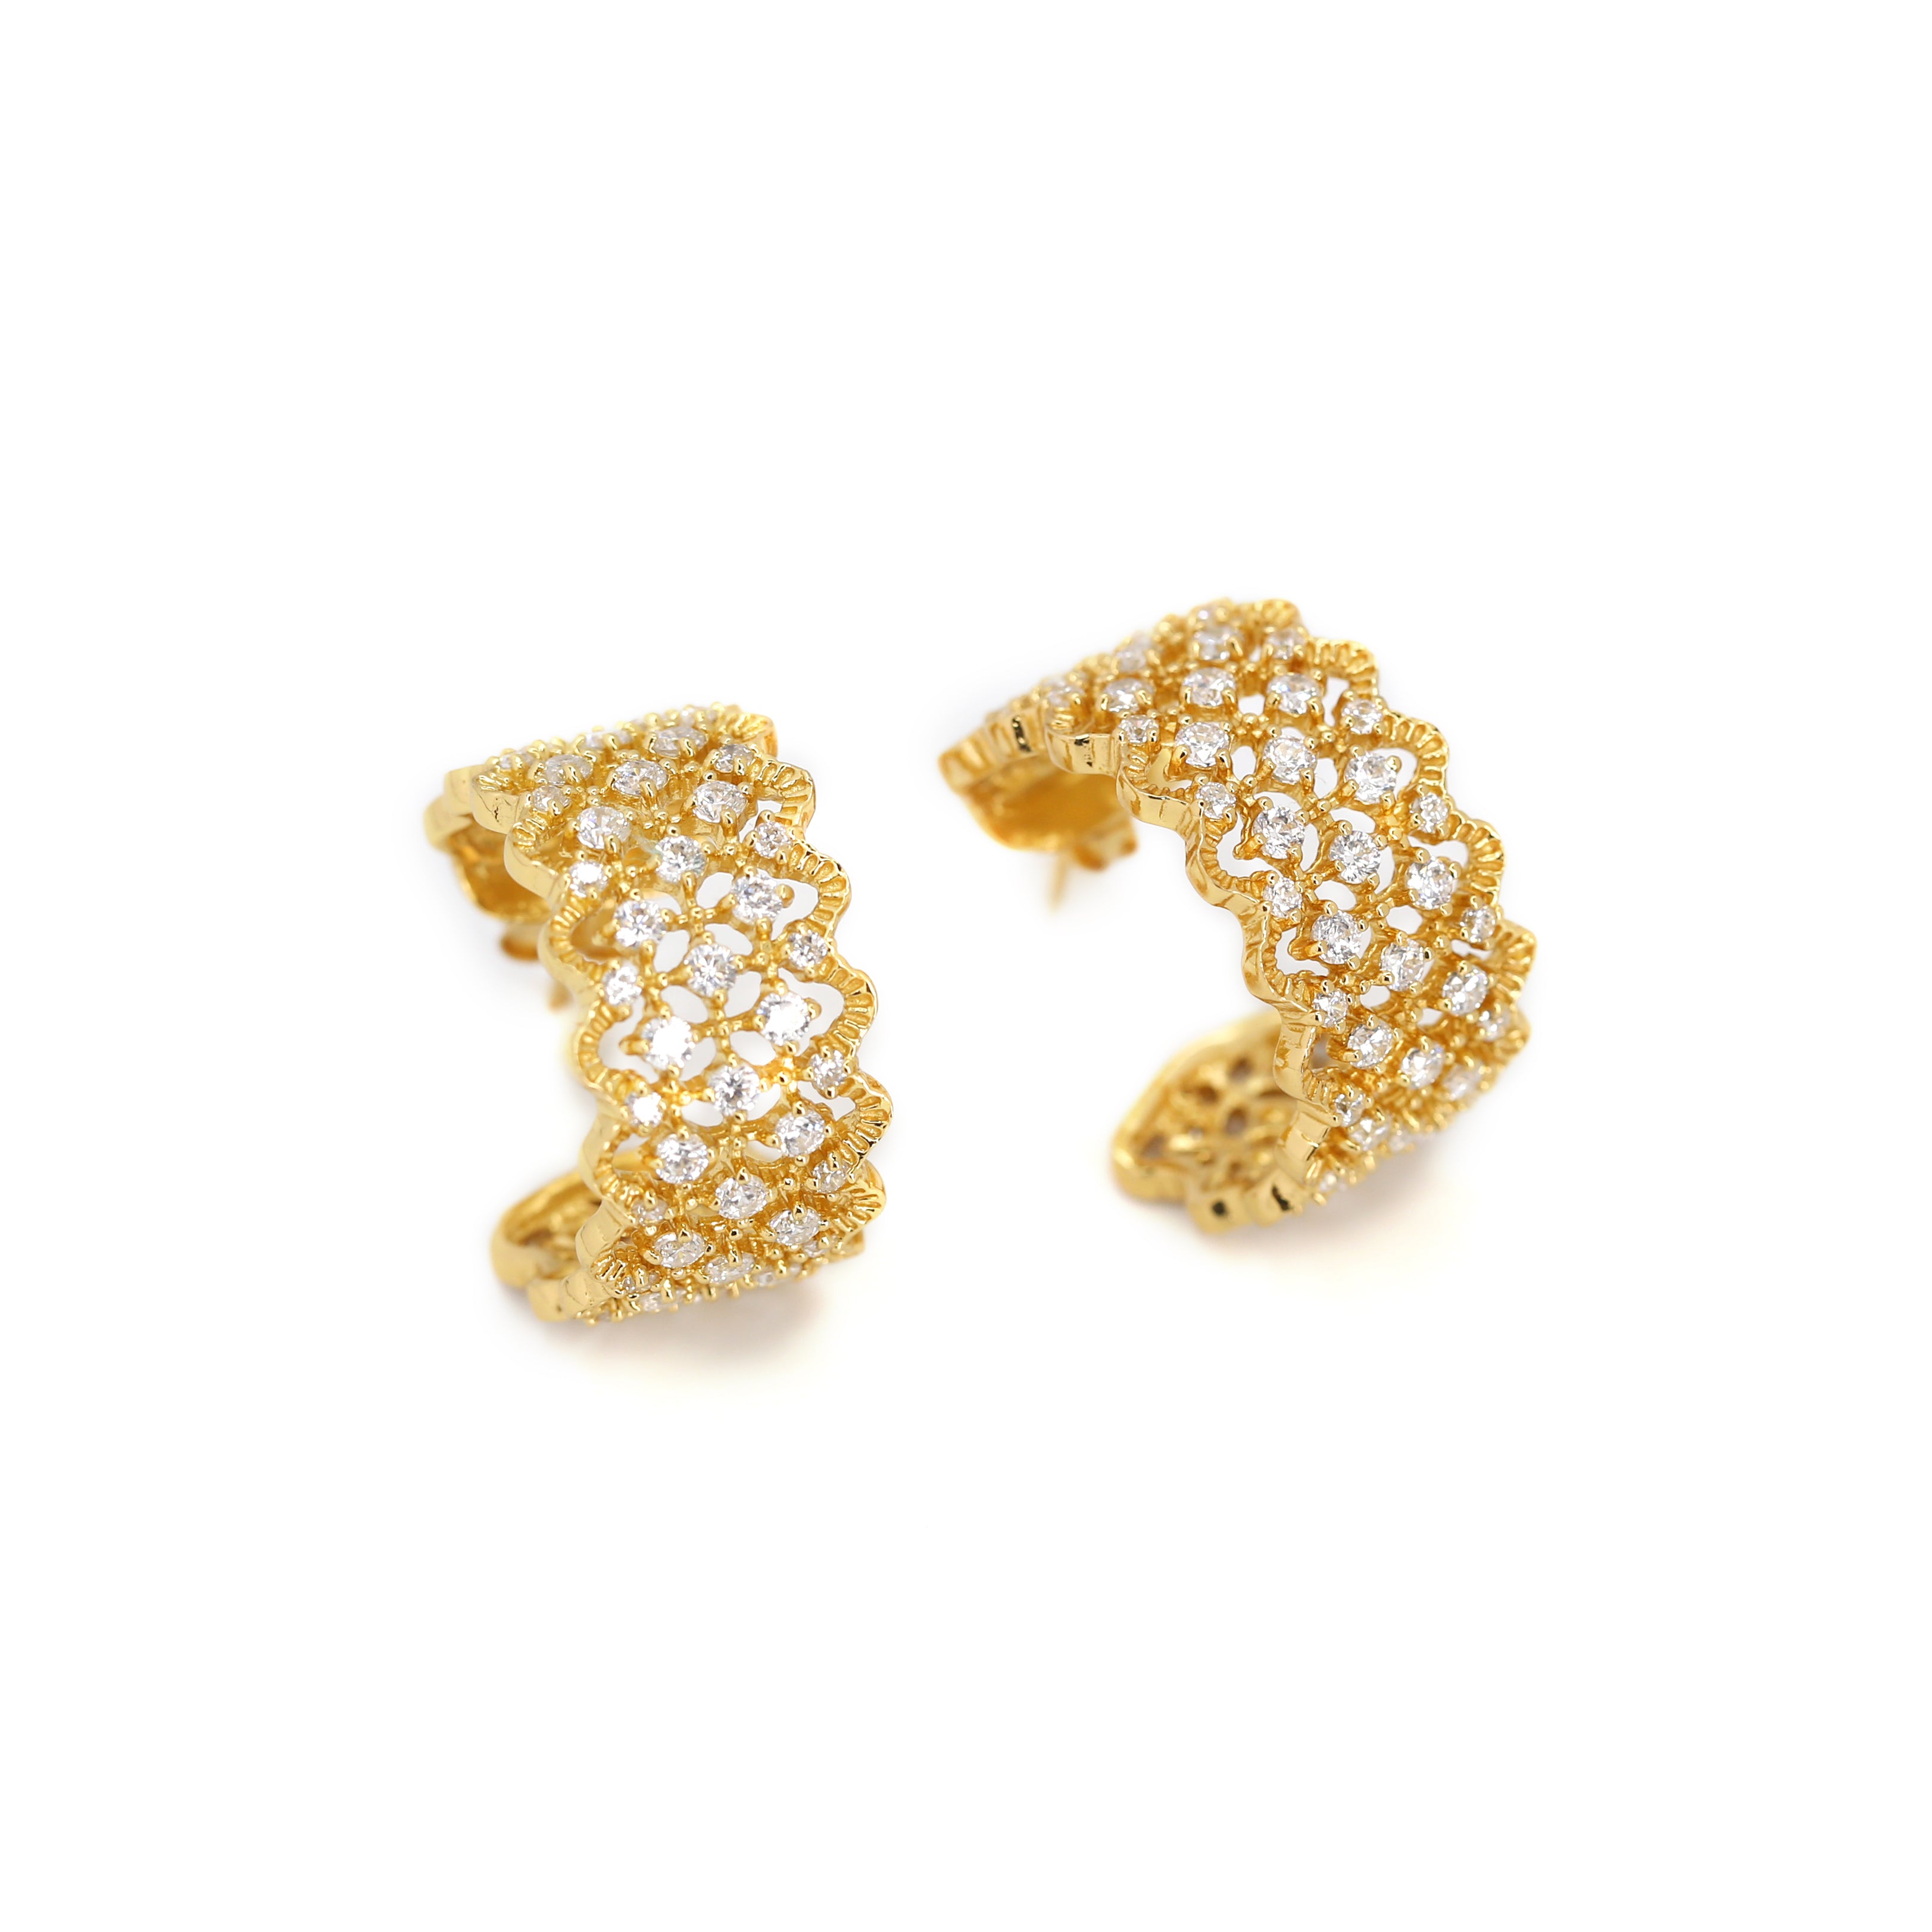 Lacy Beaded CZ Diamond Earrings 18K Gold Over Sterling Silver